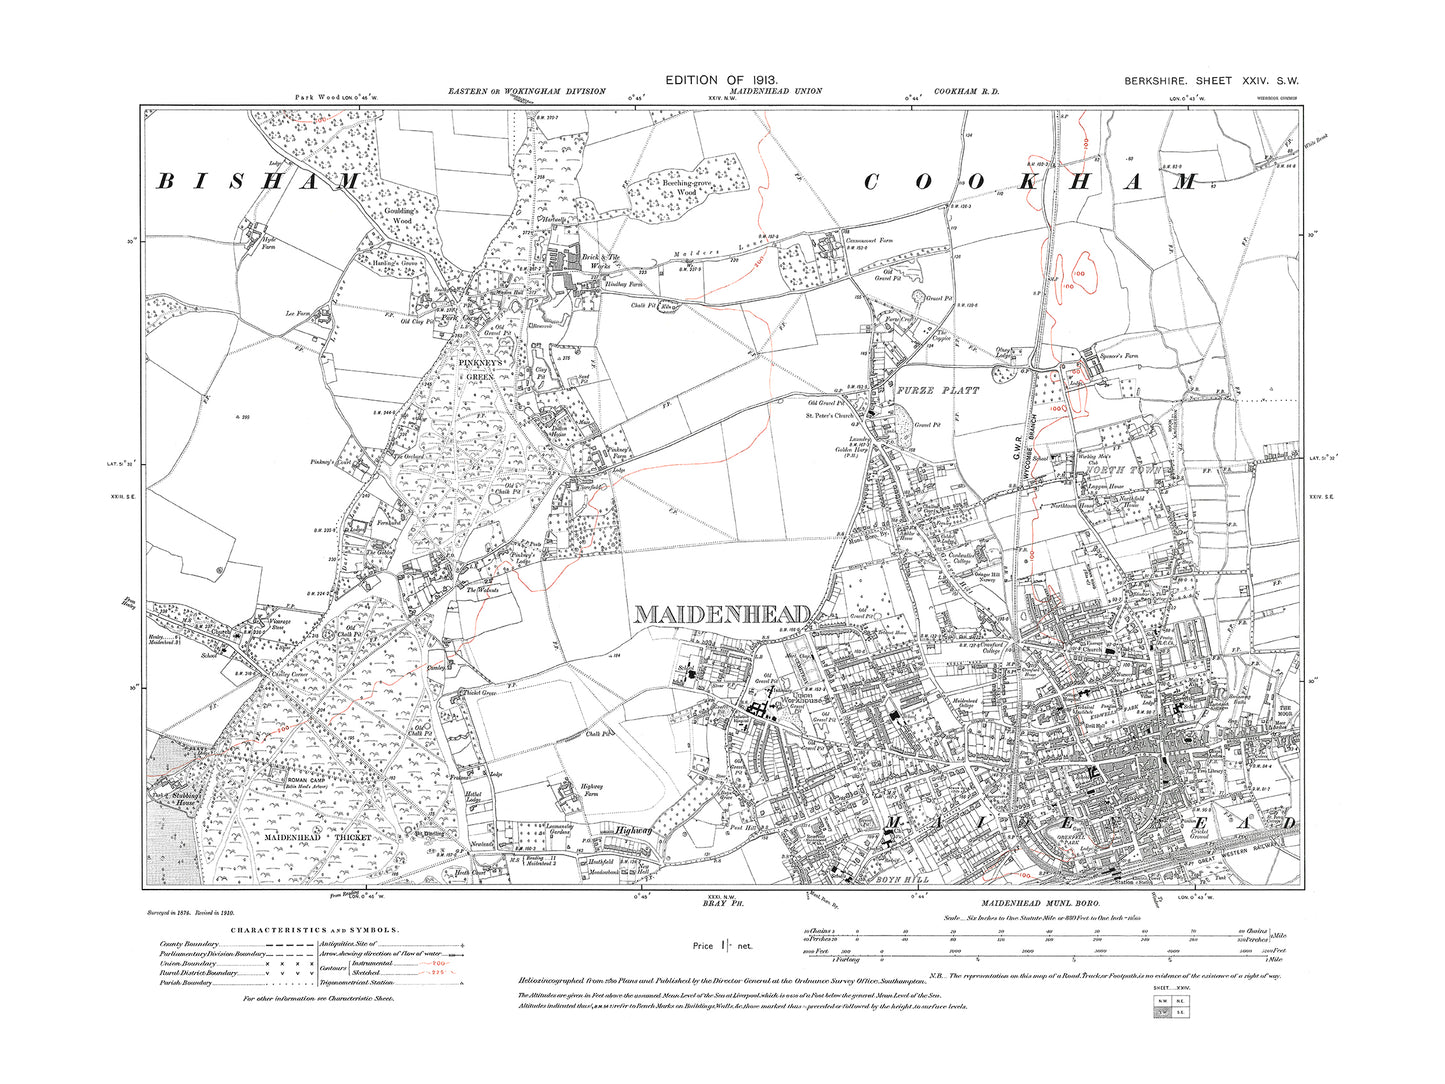 A 1913 map showing Maidenhead in Berkshire - OS 1:10560 scale map, Berks 24SW